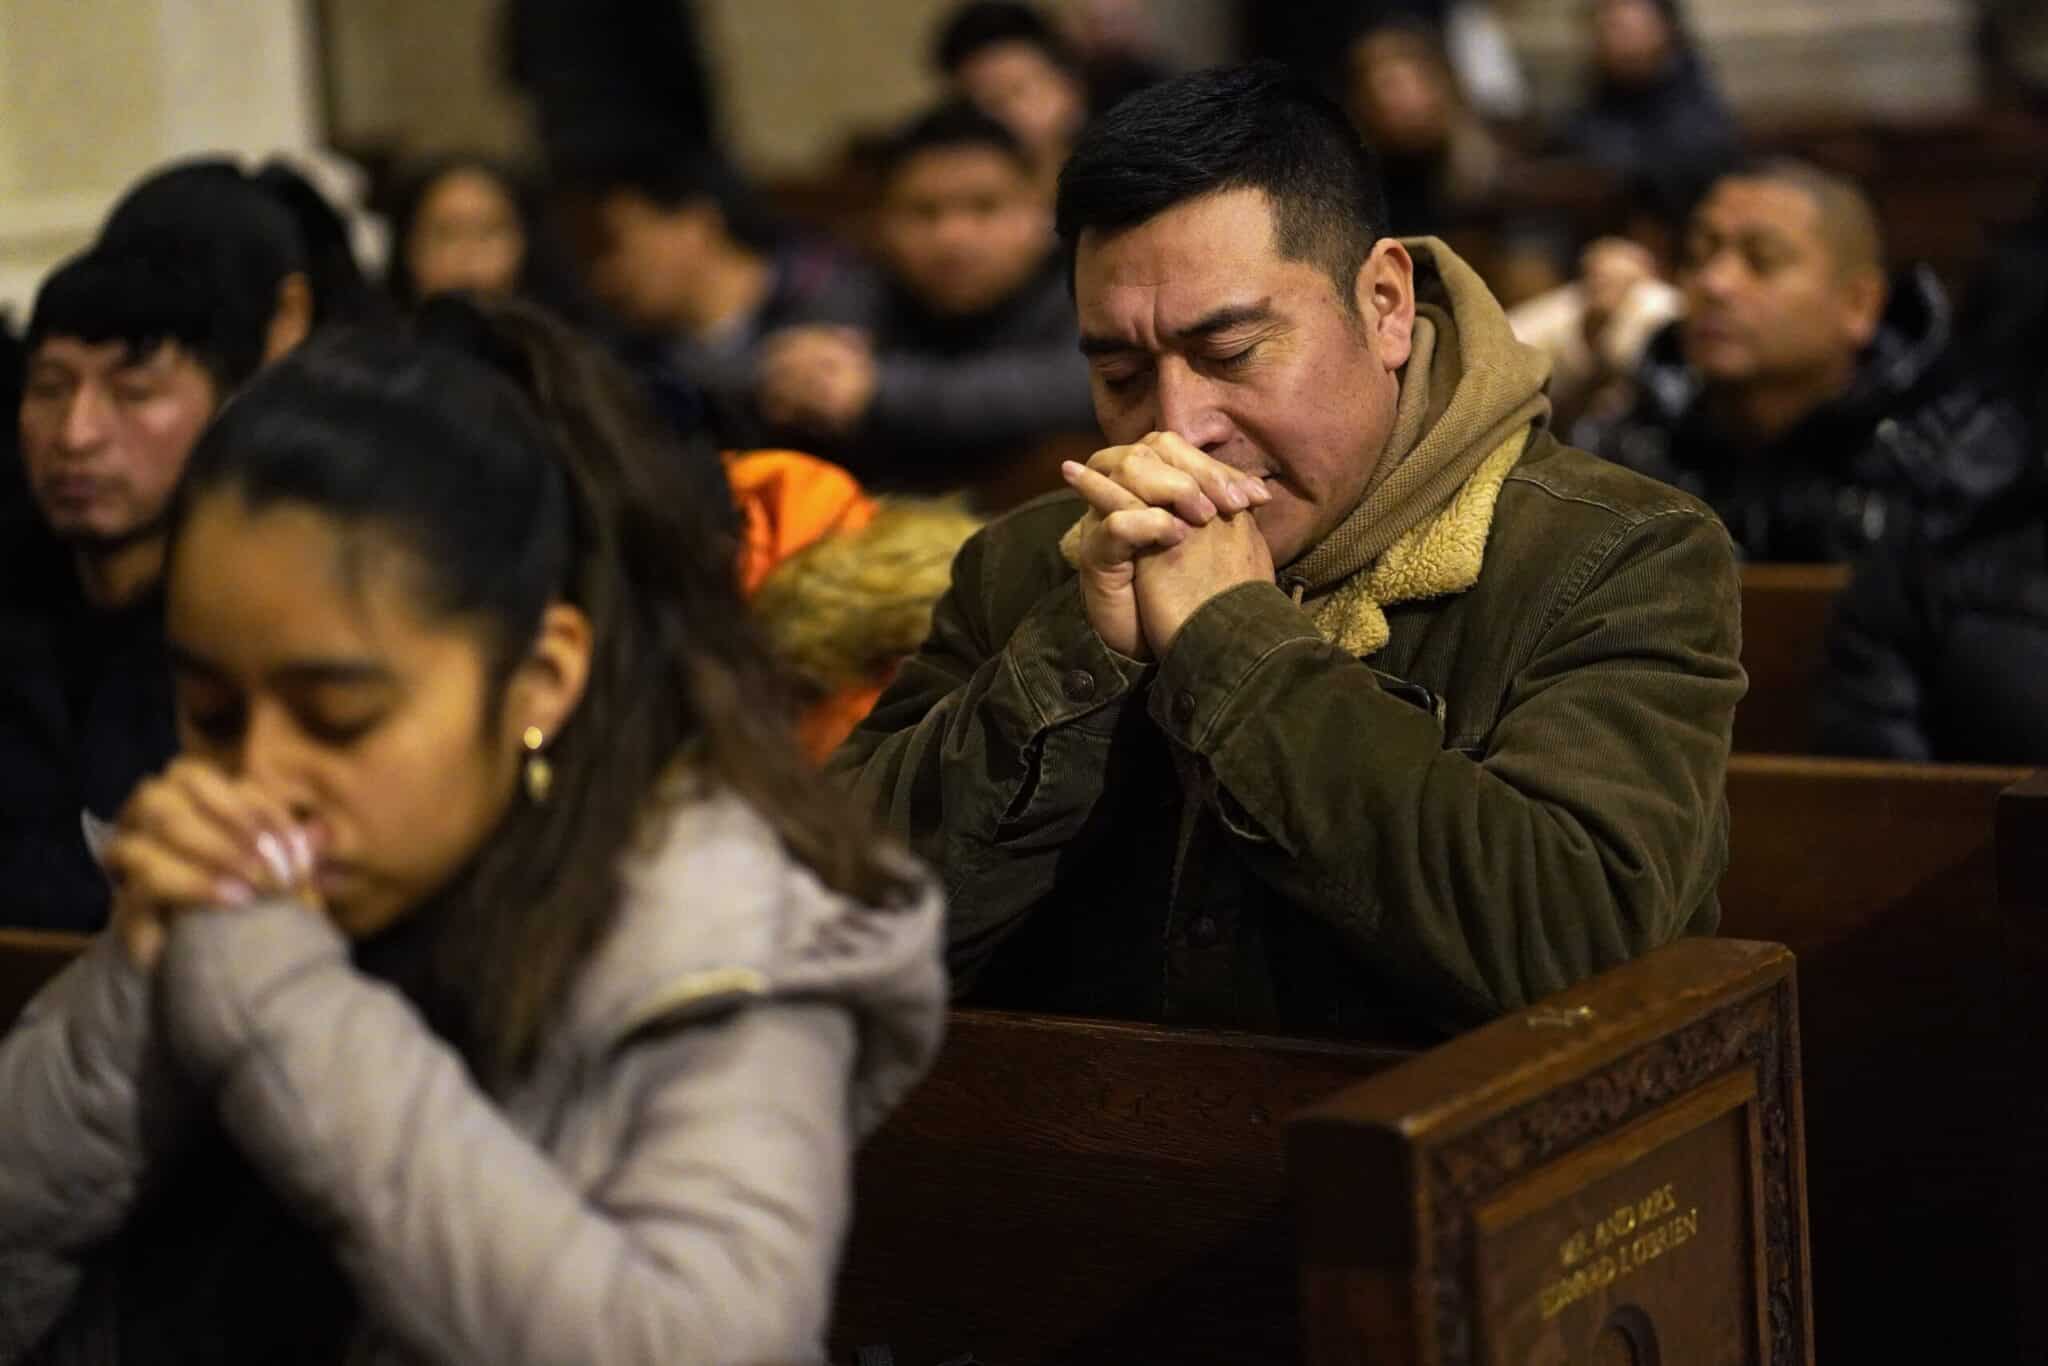 People pray during a special Mass celebrated in honor of the Black Christ of Esquipulas, Guatemala, Jan. 7, 2024, at St. Patrick's Cathedral in New York City. Results of a Gallup poll released March 25 showed that regular church attendance in the U.S. continues to decline across the board, particularly among Catholics. (OSV News photo/Gregory A. Shemitz)